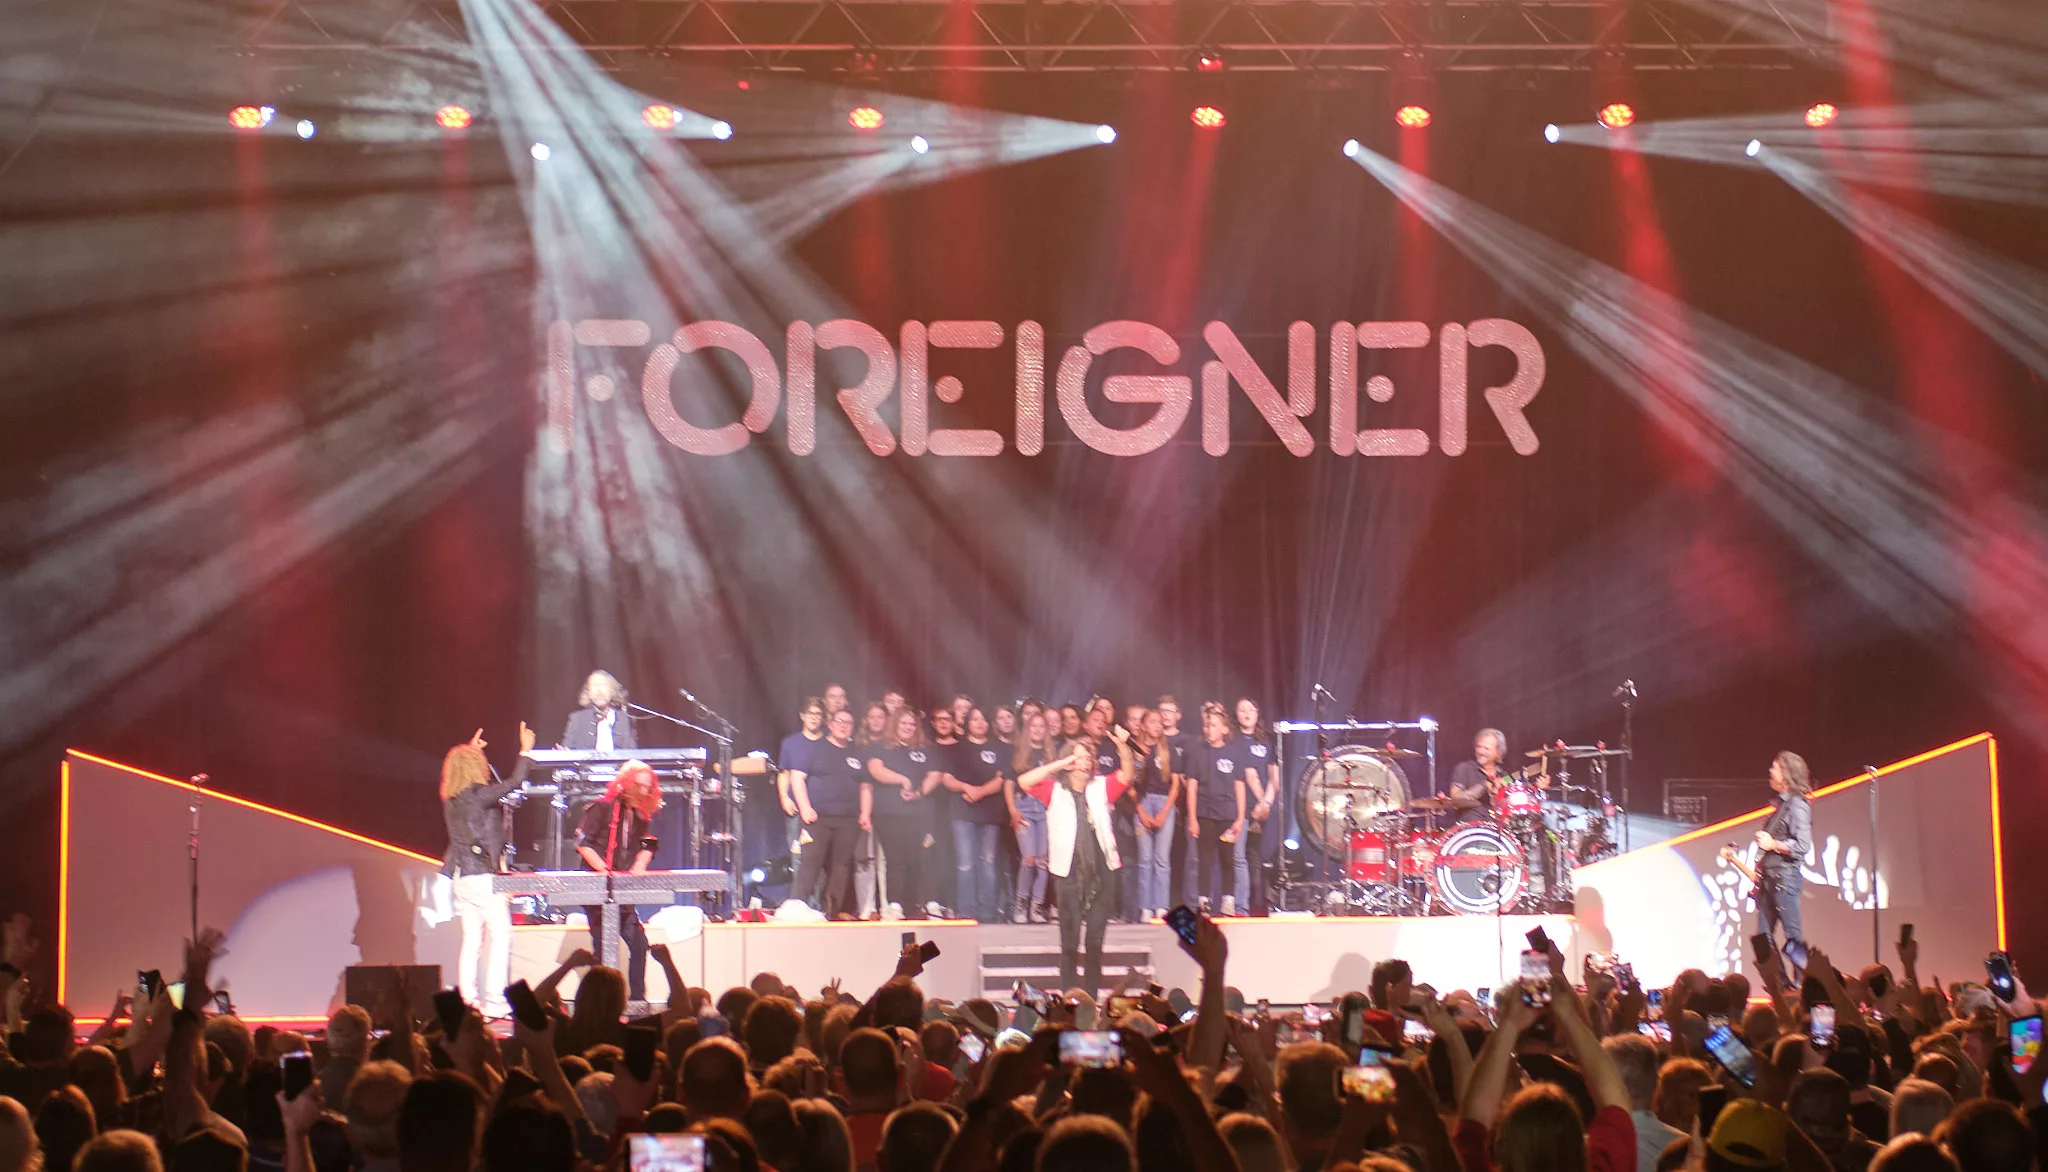 The Story of how the New Berlin High School Choir got to rock with Foreigner at Springfield’s BOS Center